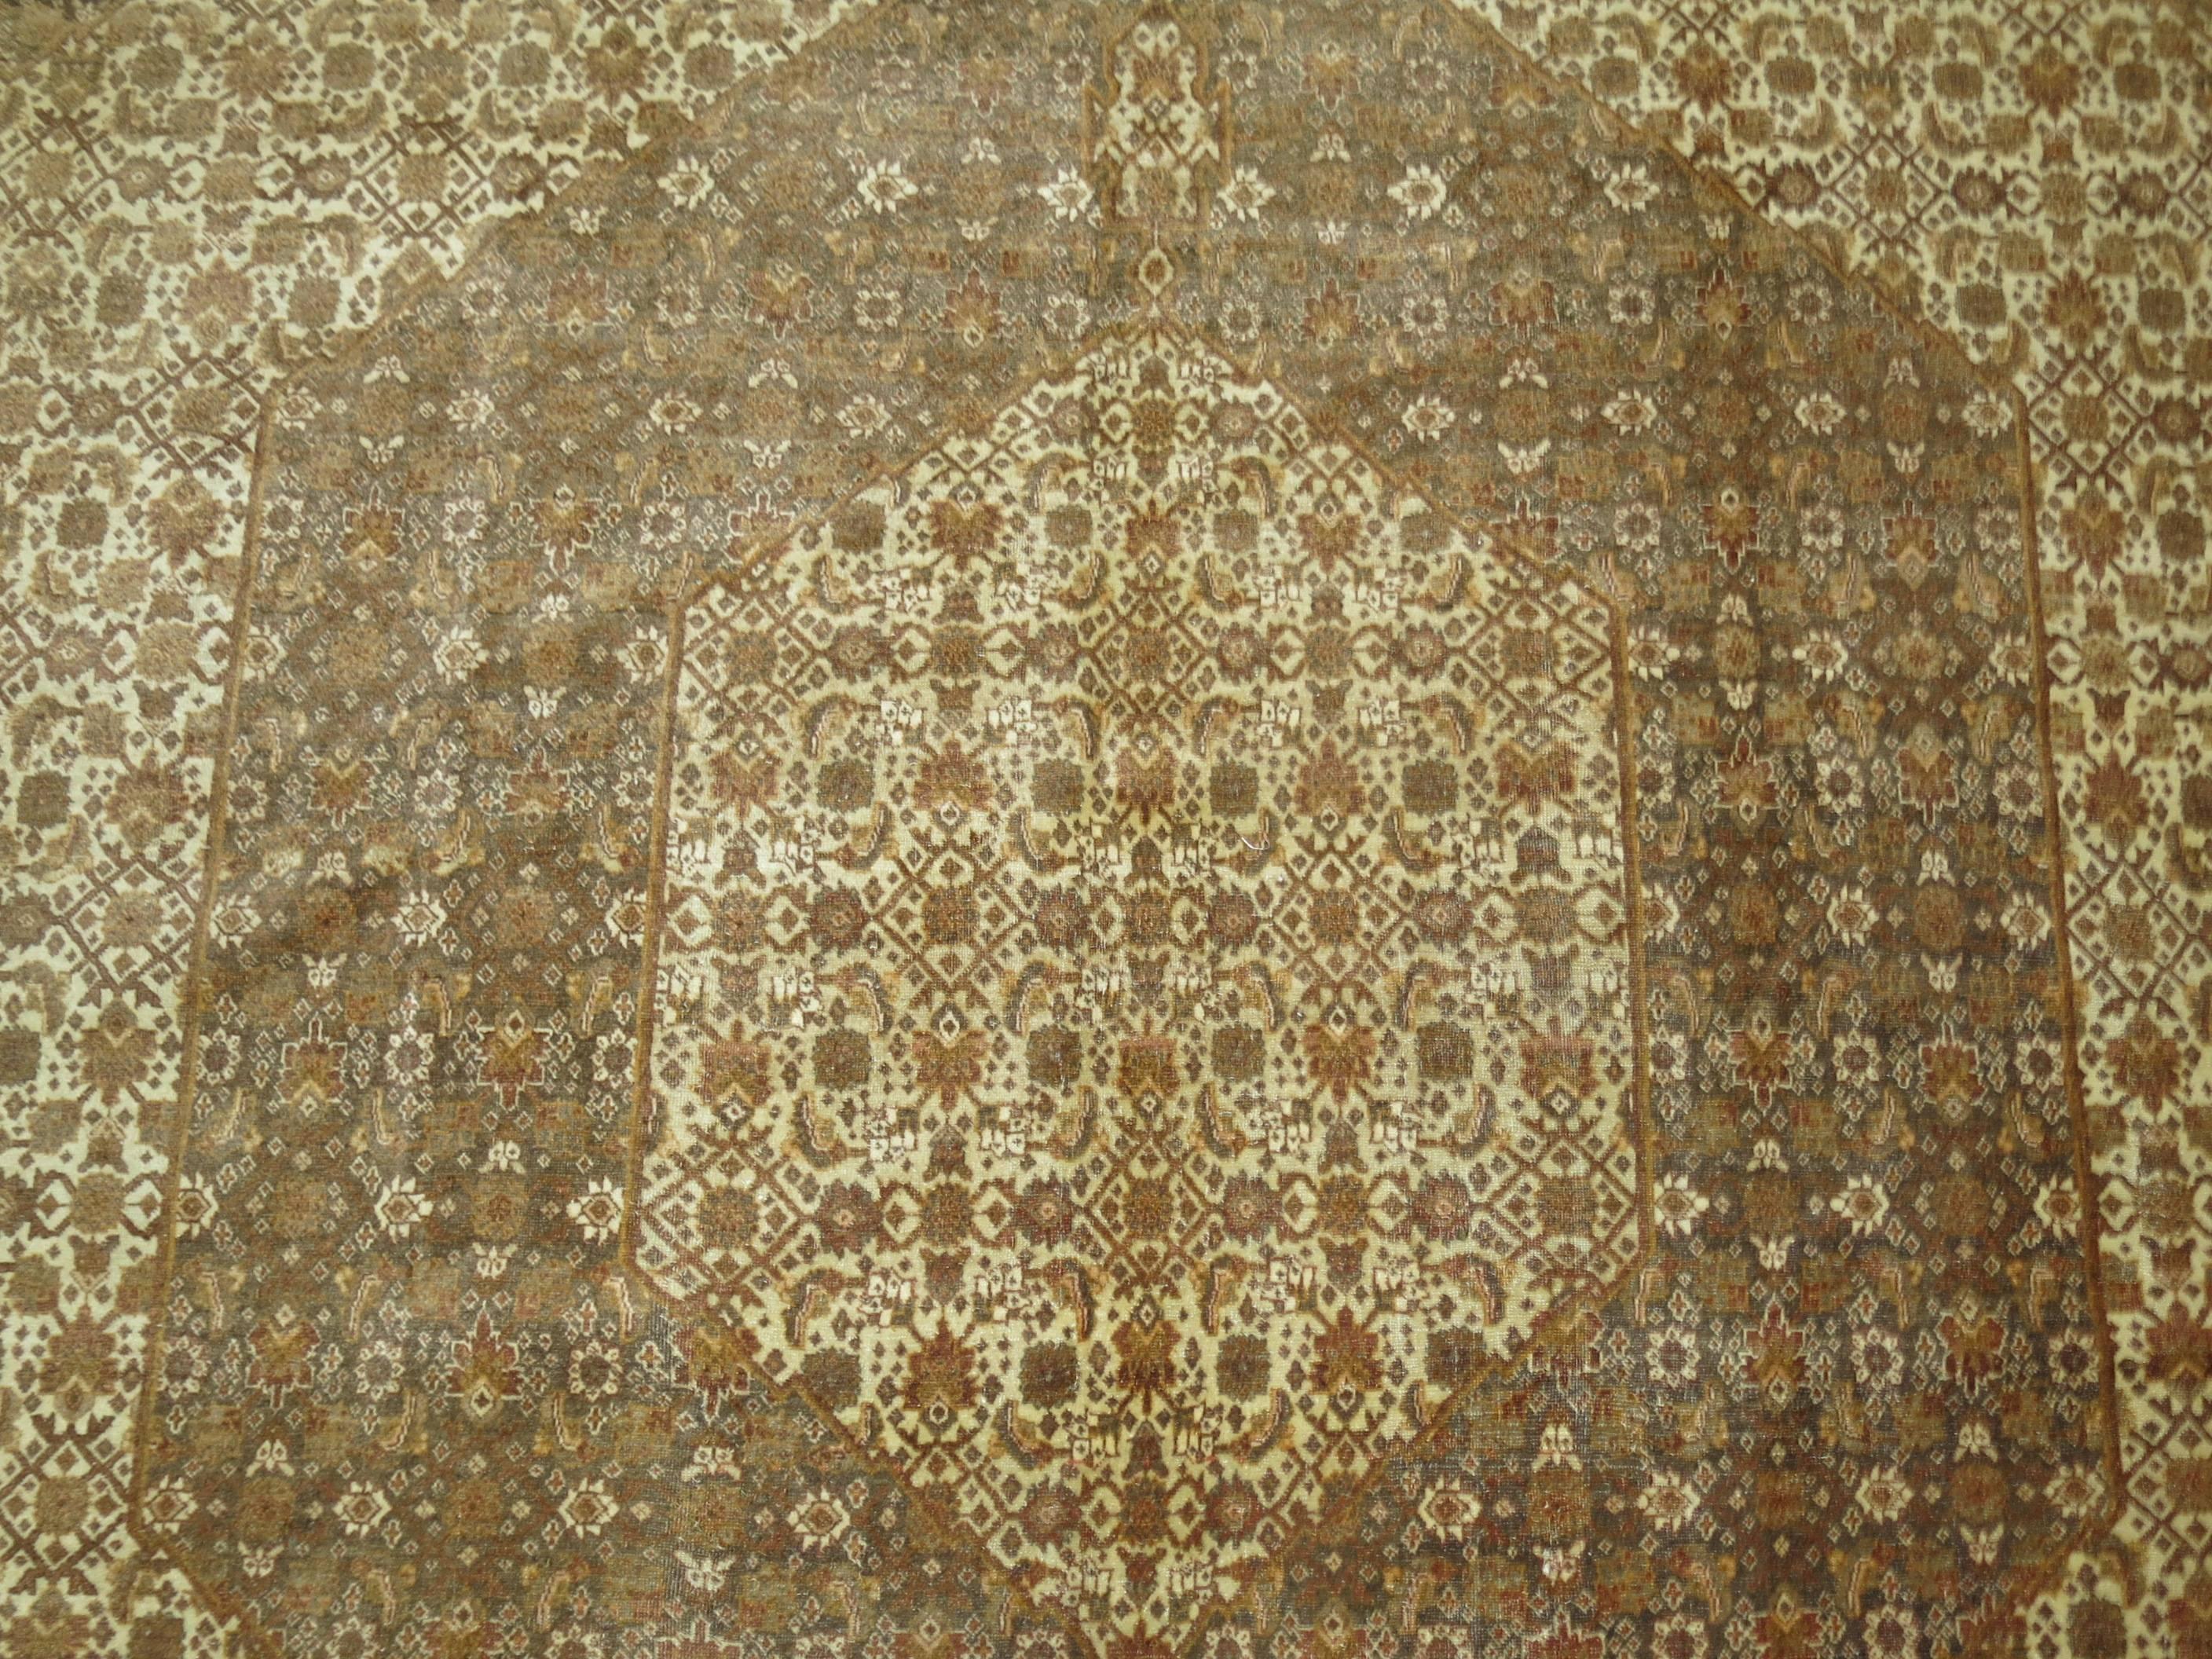 Early 20th century Persian Tabriz with classic Herati motif and timeless medallion and border design. Predominantly brown and orange accents.

